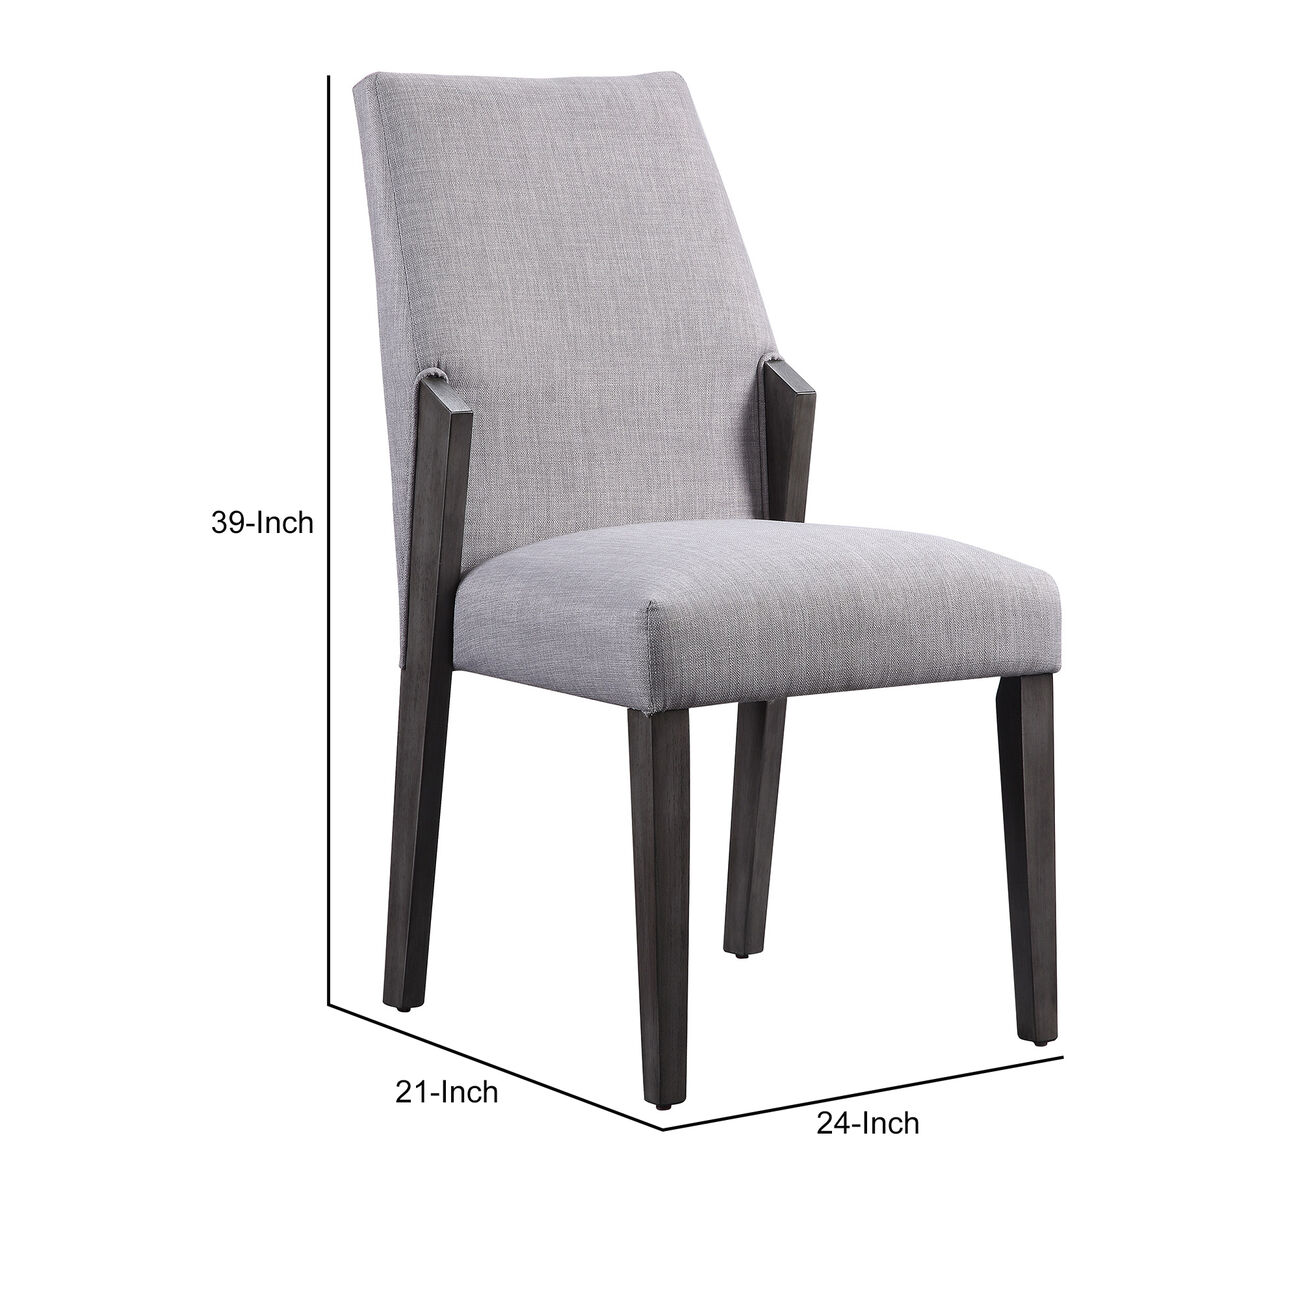 Wood and fabric Upholstered Dining Chairs, Set of 2, Gray and Black